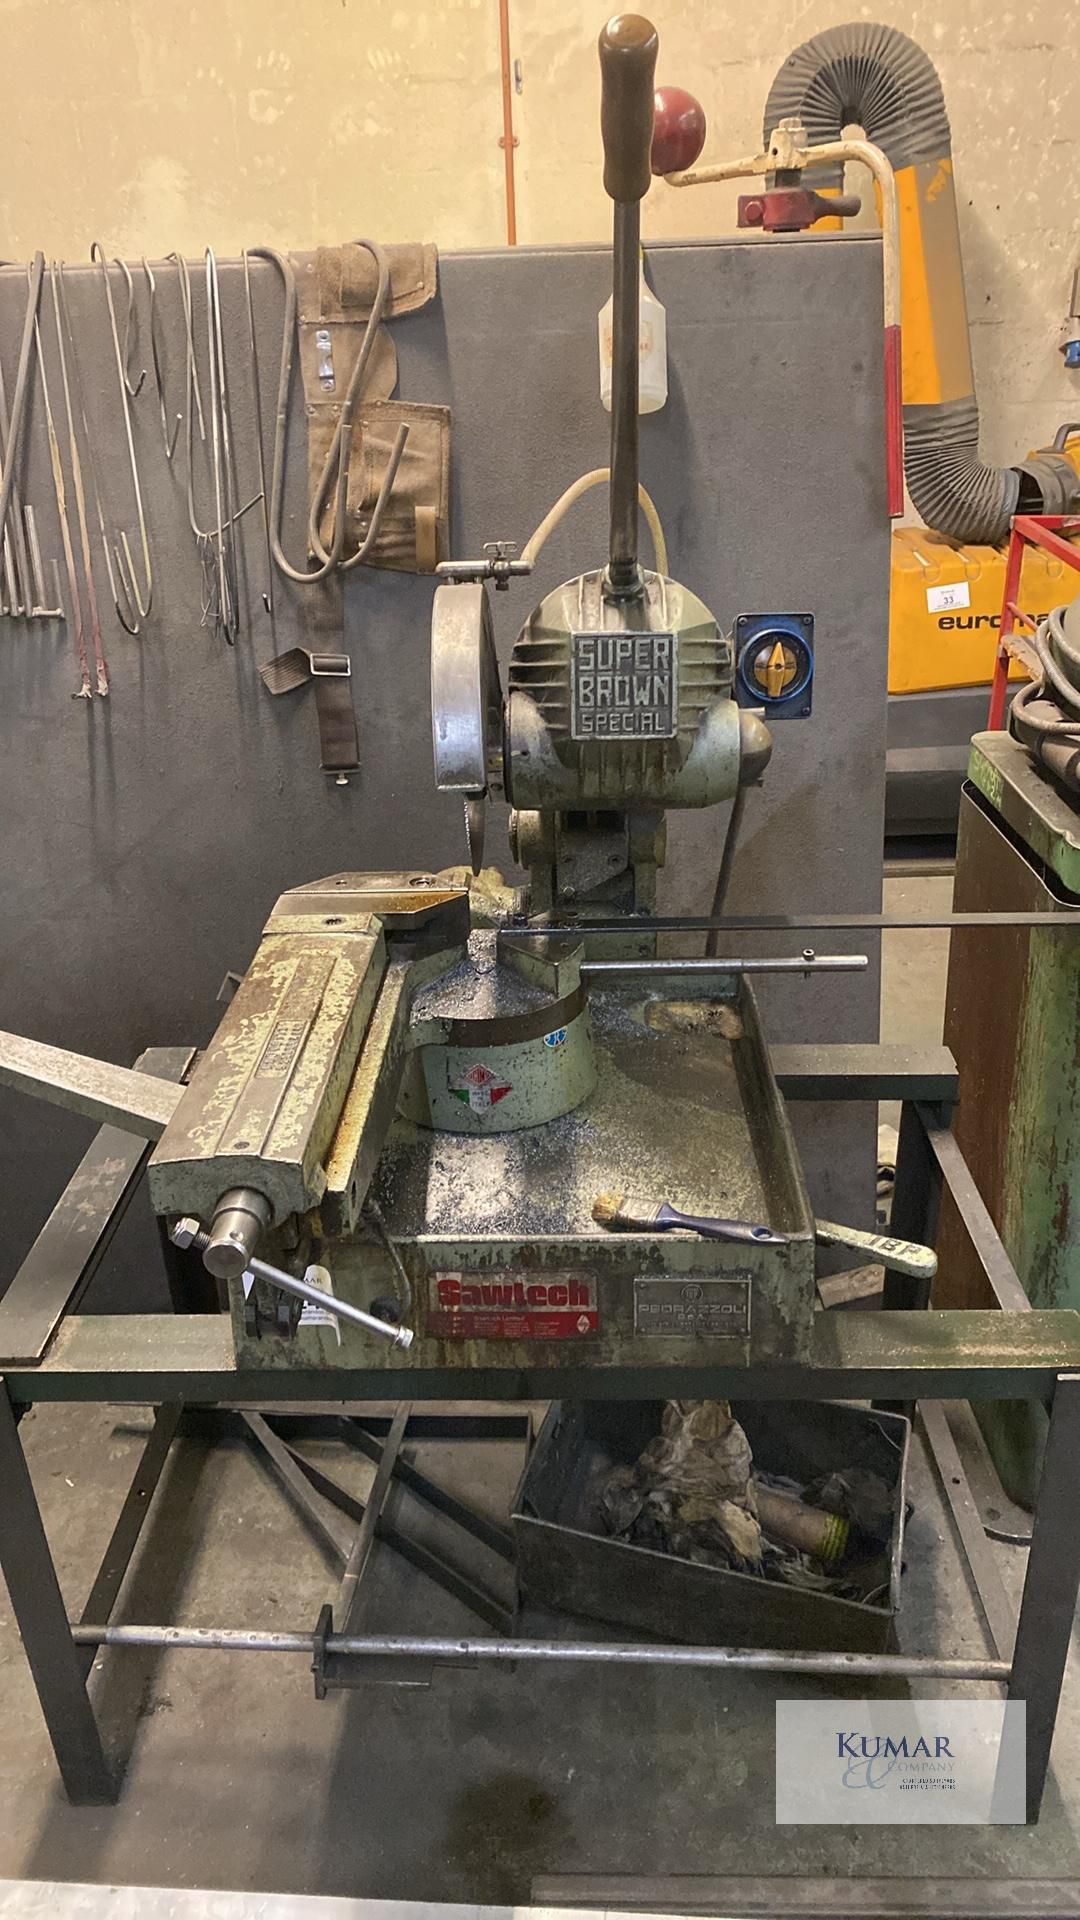 Pedrazzoli SuperMec Brown Cut Off Saw Mounted on Work Bench with Specialist Vice & Roller Wheel